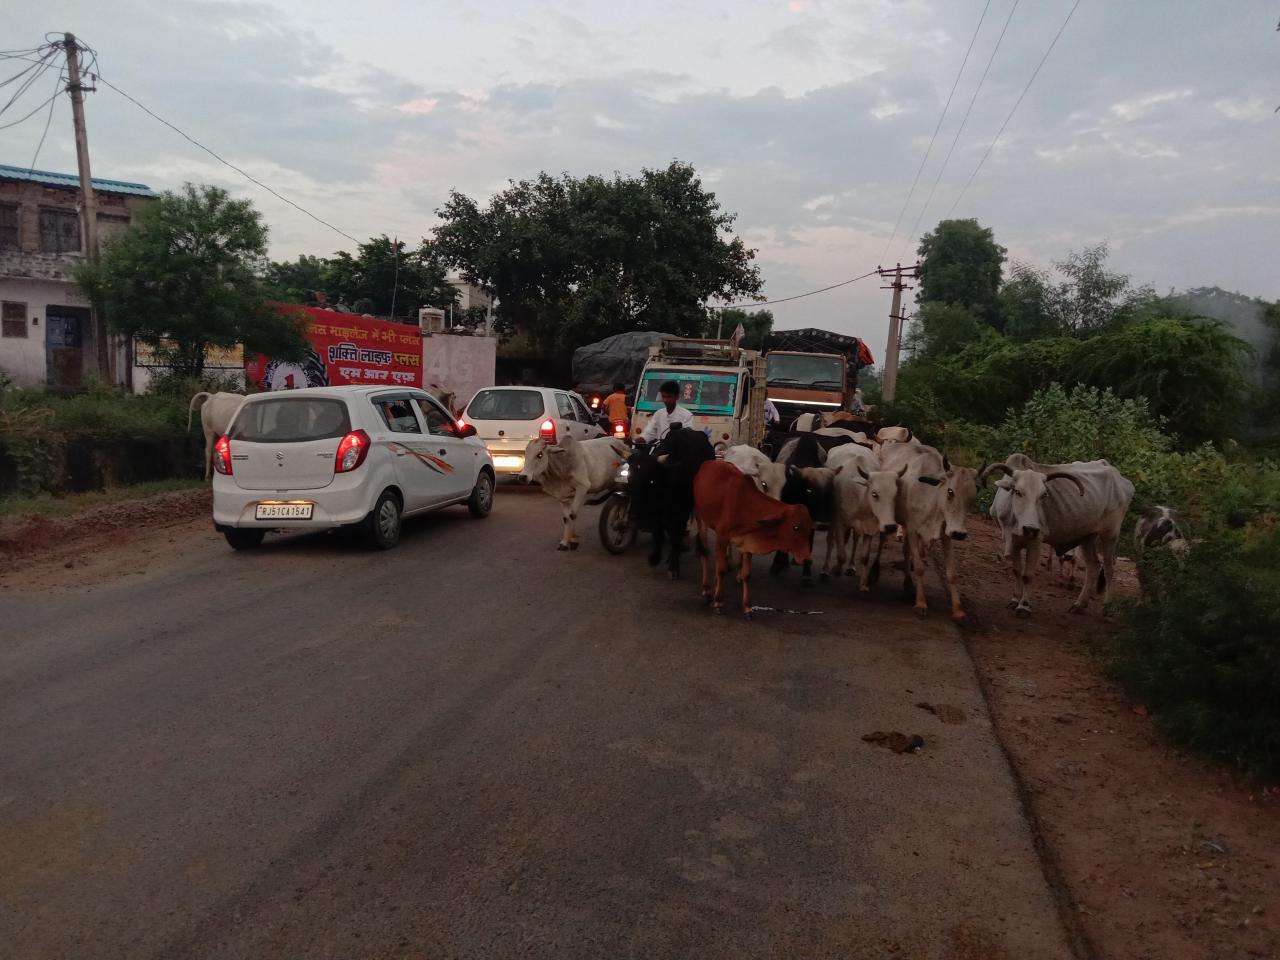 Cattle on the road in bhilwara